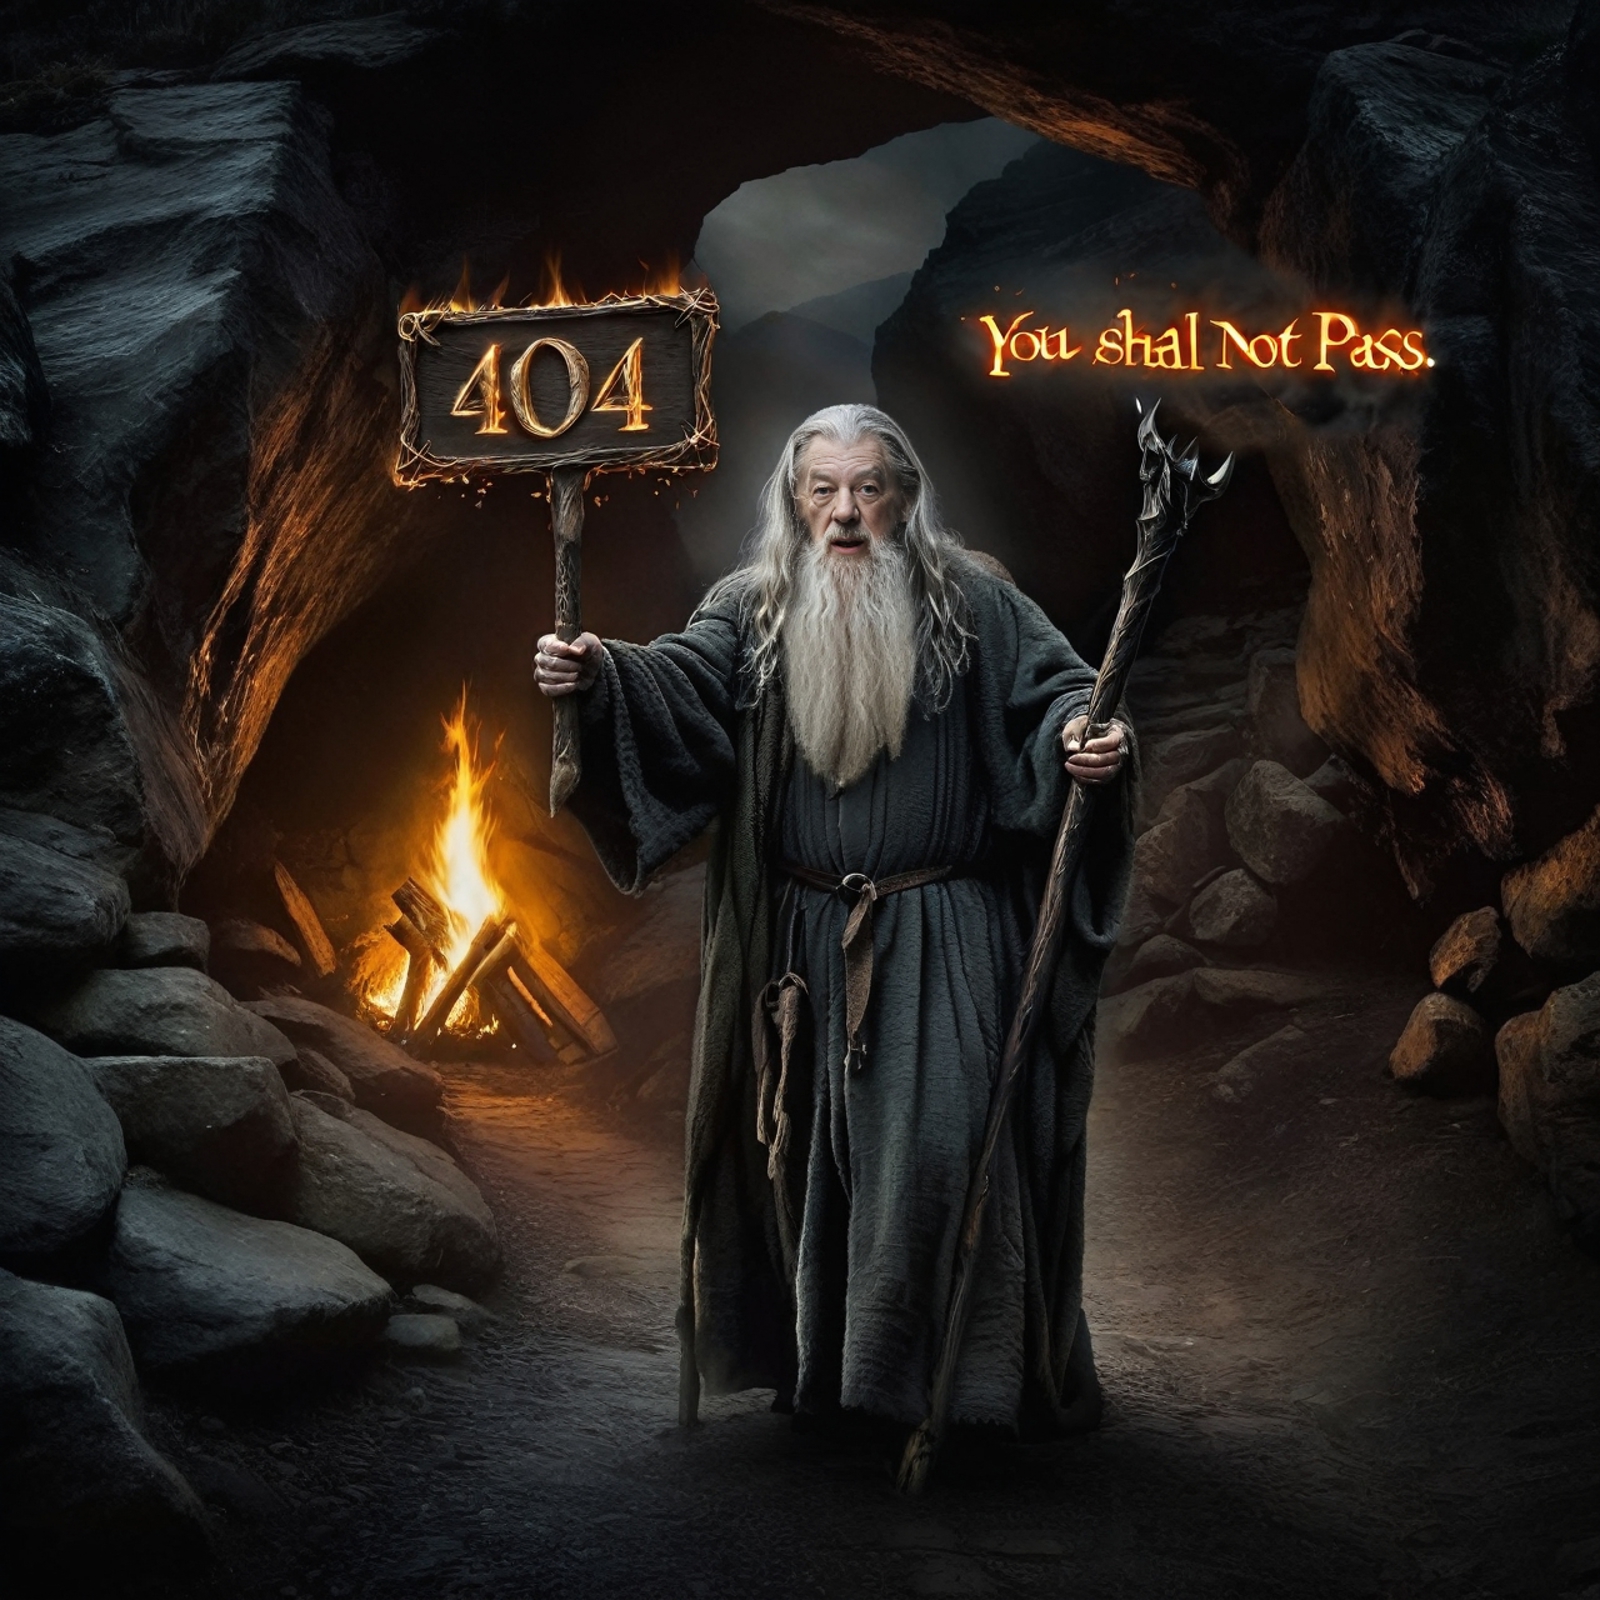 A wizard holding a 404 sign while standing in front of a cave.